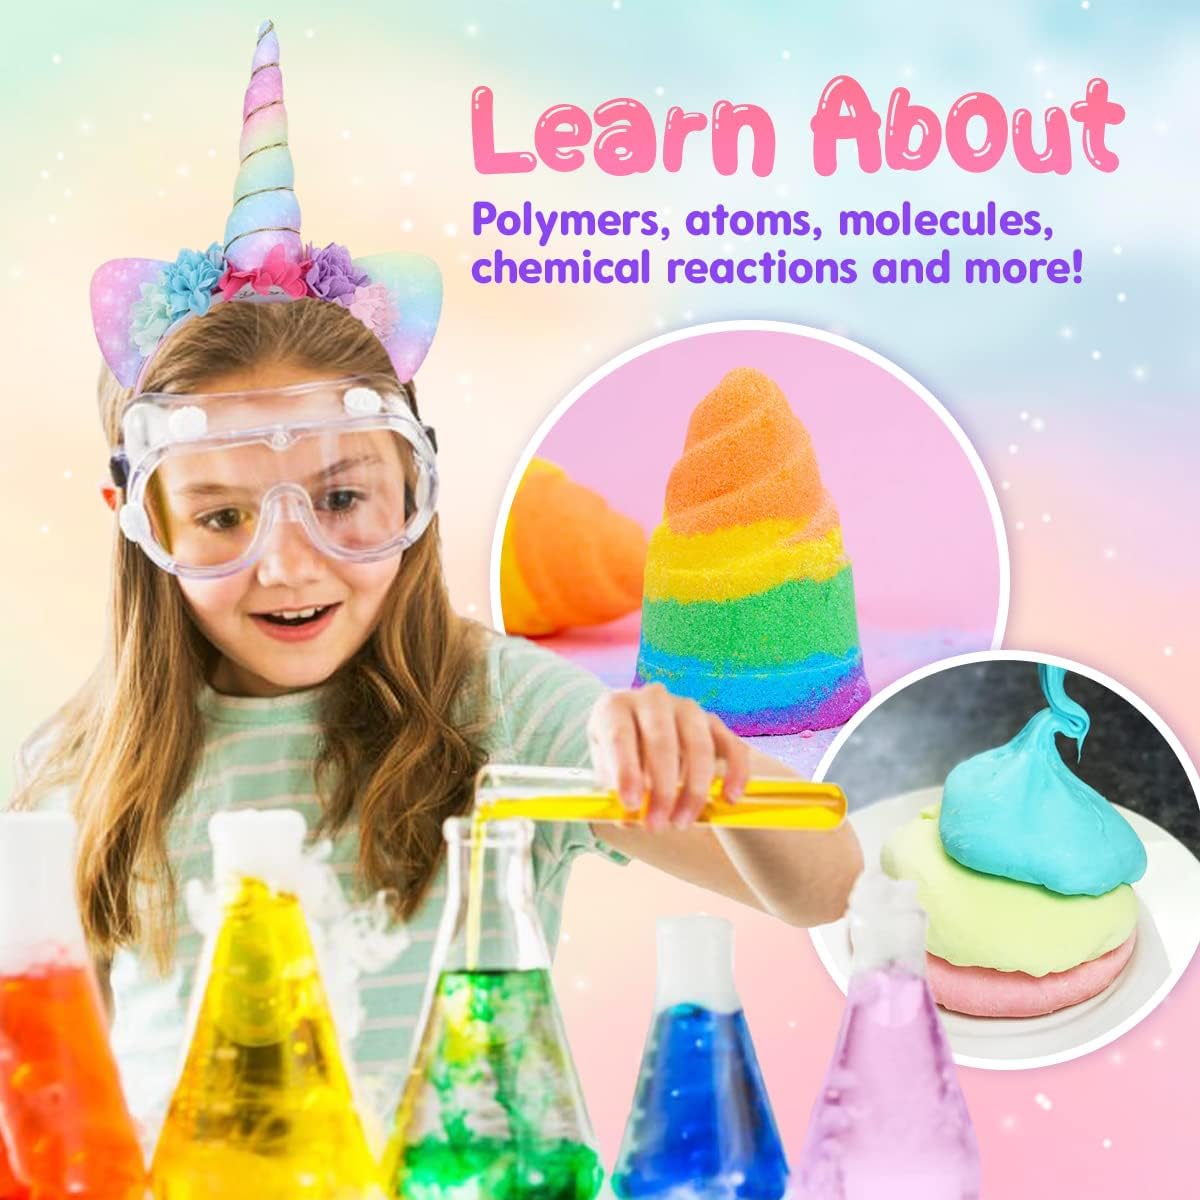 Unicorn Slime & Crystals Science Kit – Playz - Fun for all ages!